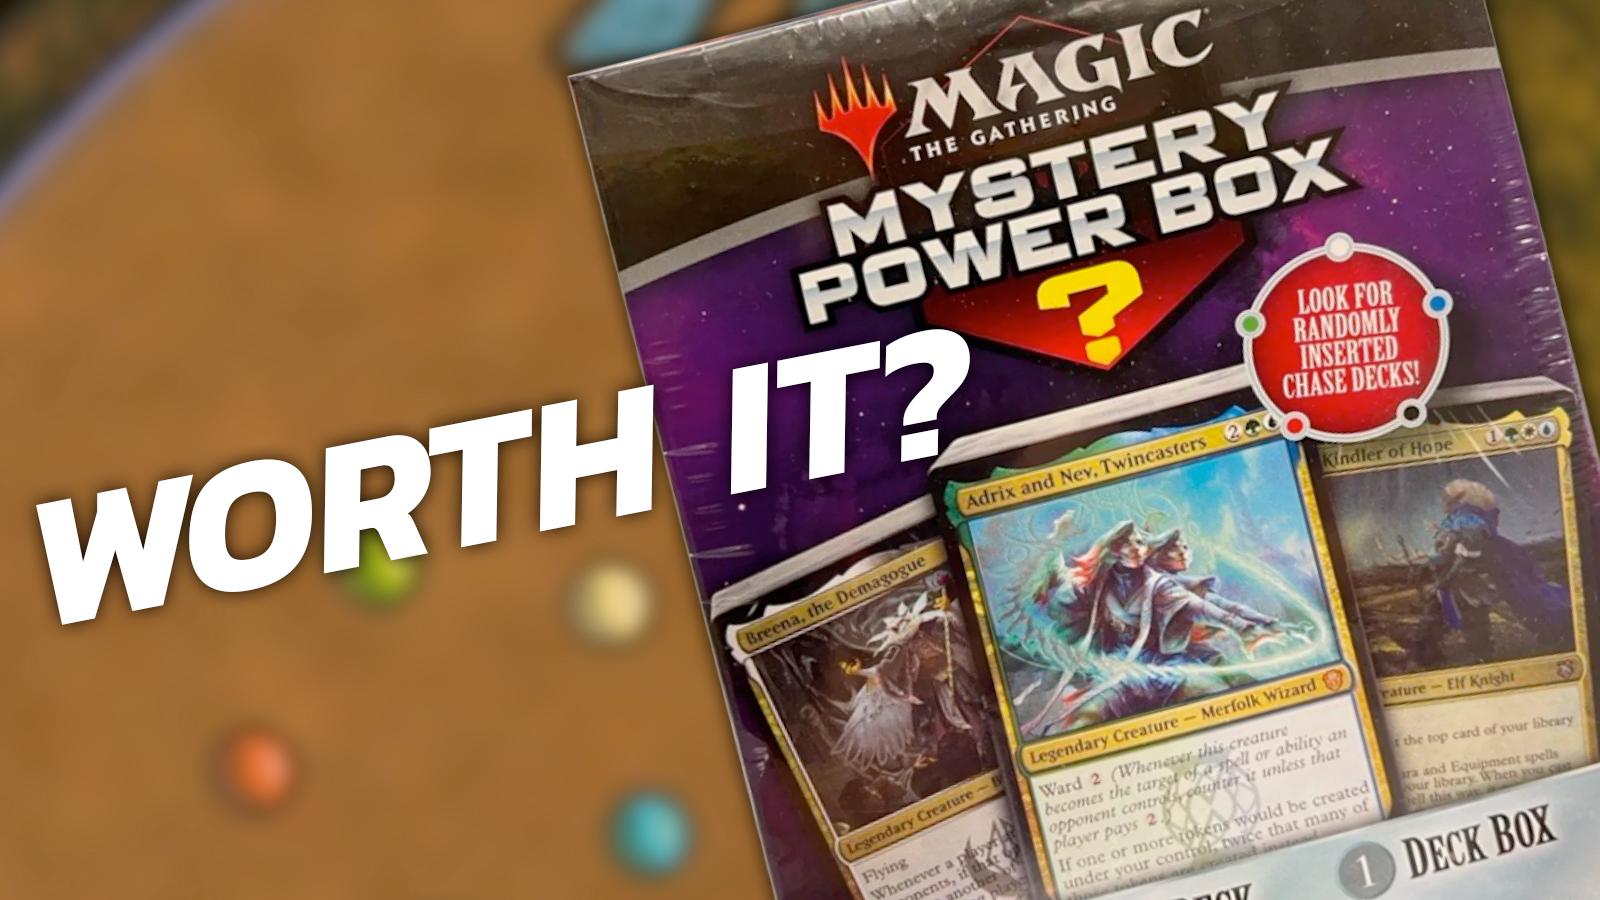 Magic Mystery Power Box from Walmart with text saying "Worth it?"